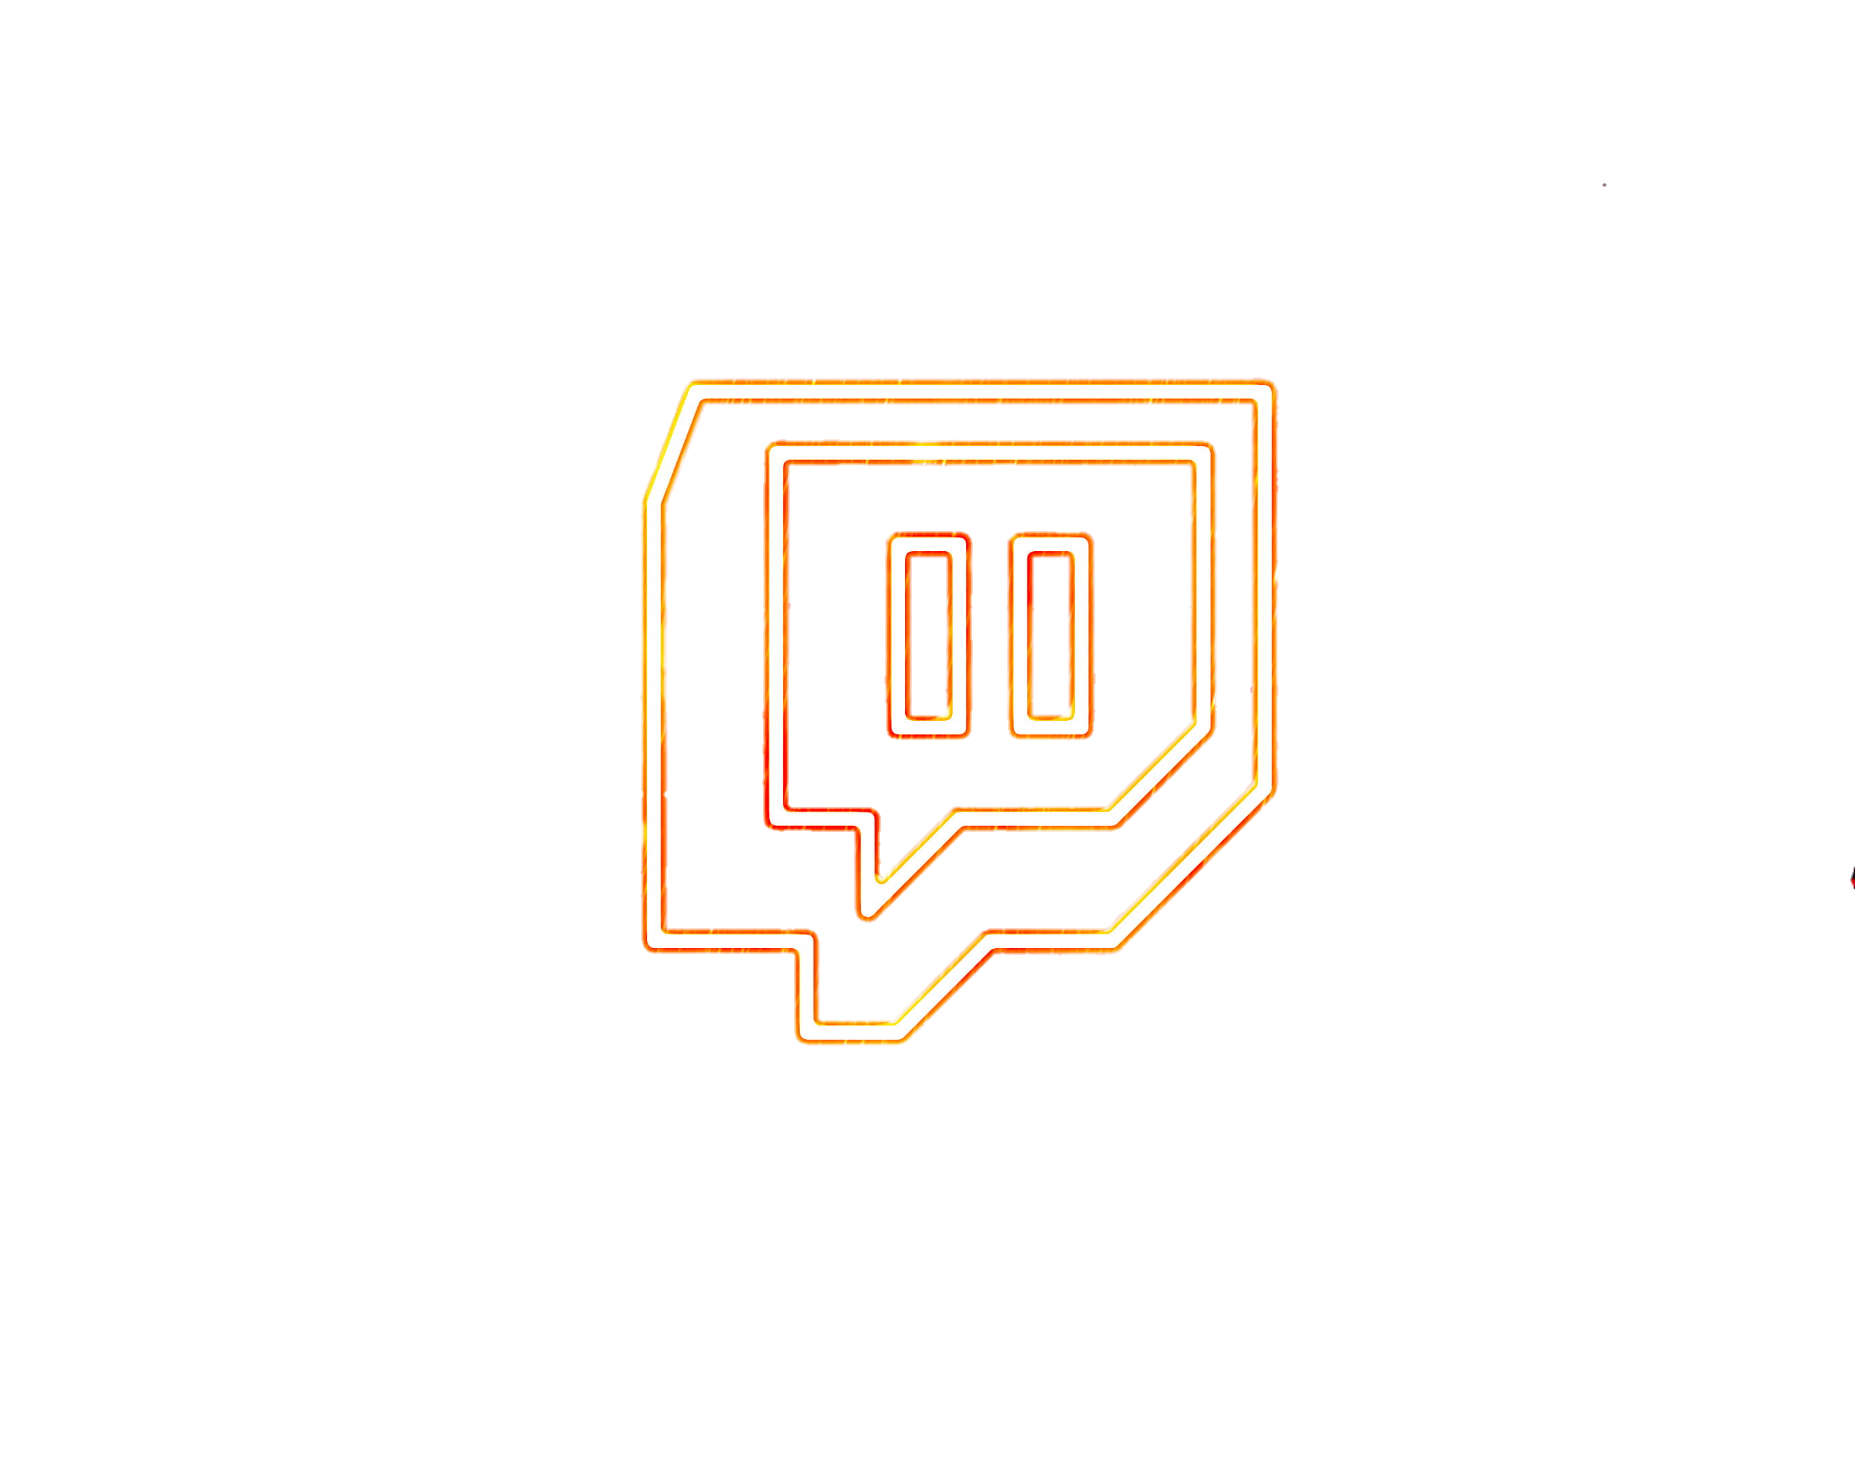 twitch-logo-png-from-pngfre-30